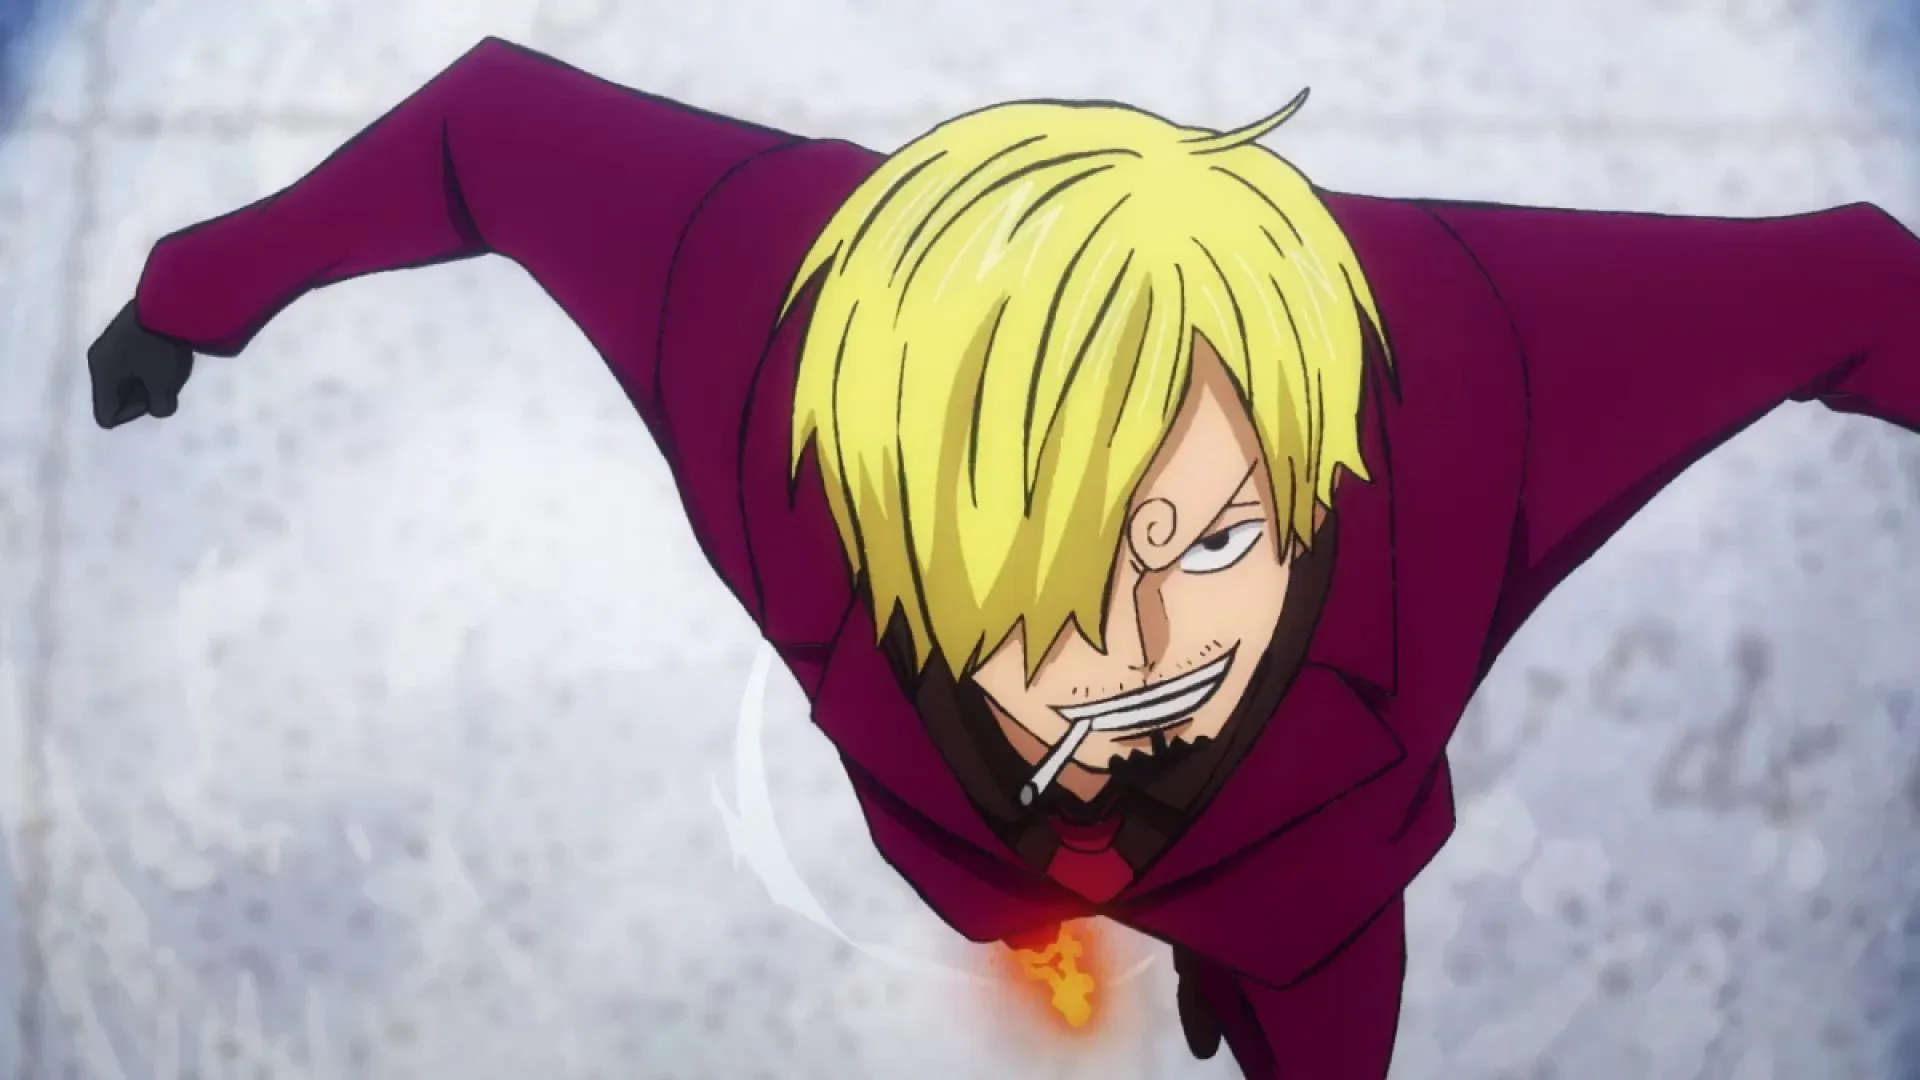 Sanji with a foot on fire in 'One Piece'